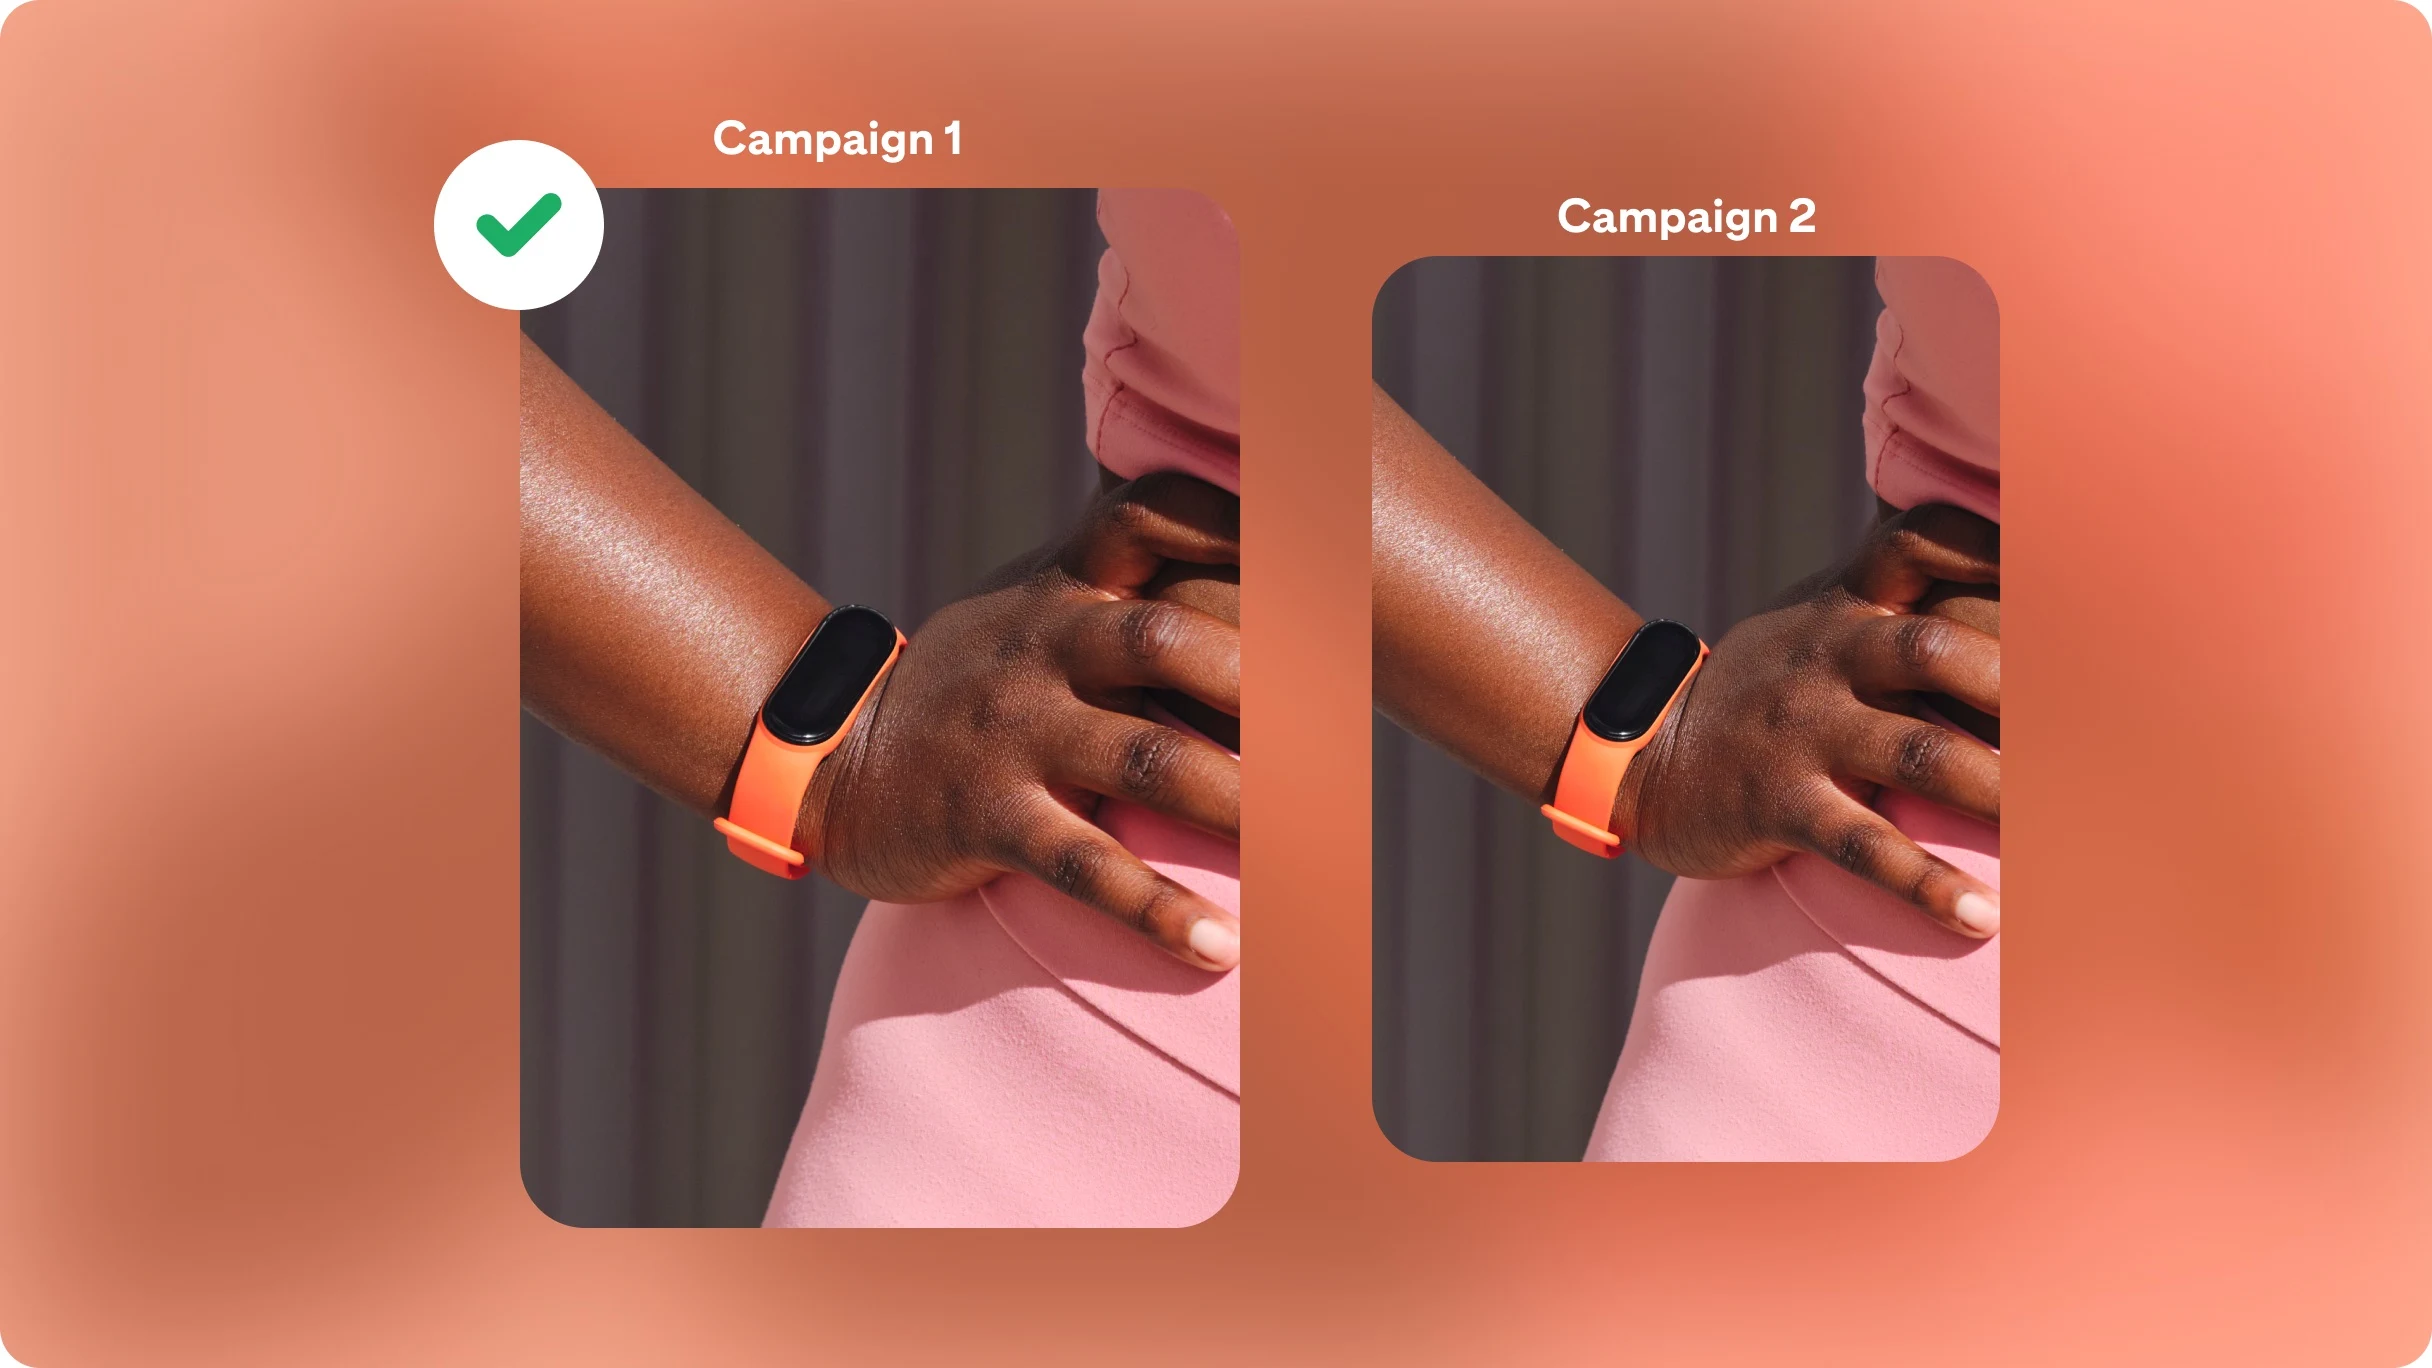 Two campaigns for watches set on a vibrant orange background. Campaign 1 is highlighted as the winner by a green check mark.